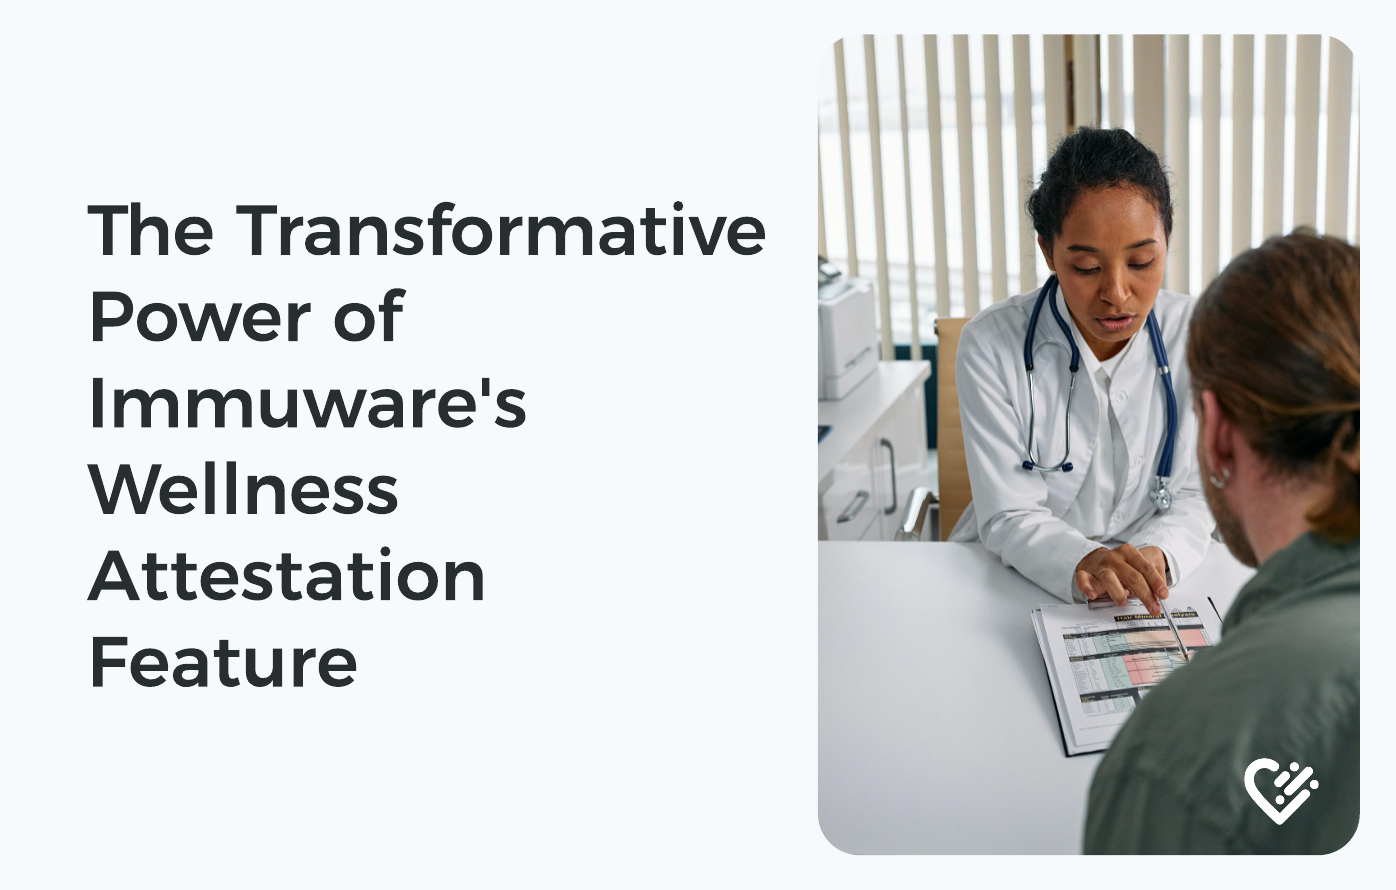 The Transformative Power of Immuware's Wellness Attestation Feature